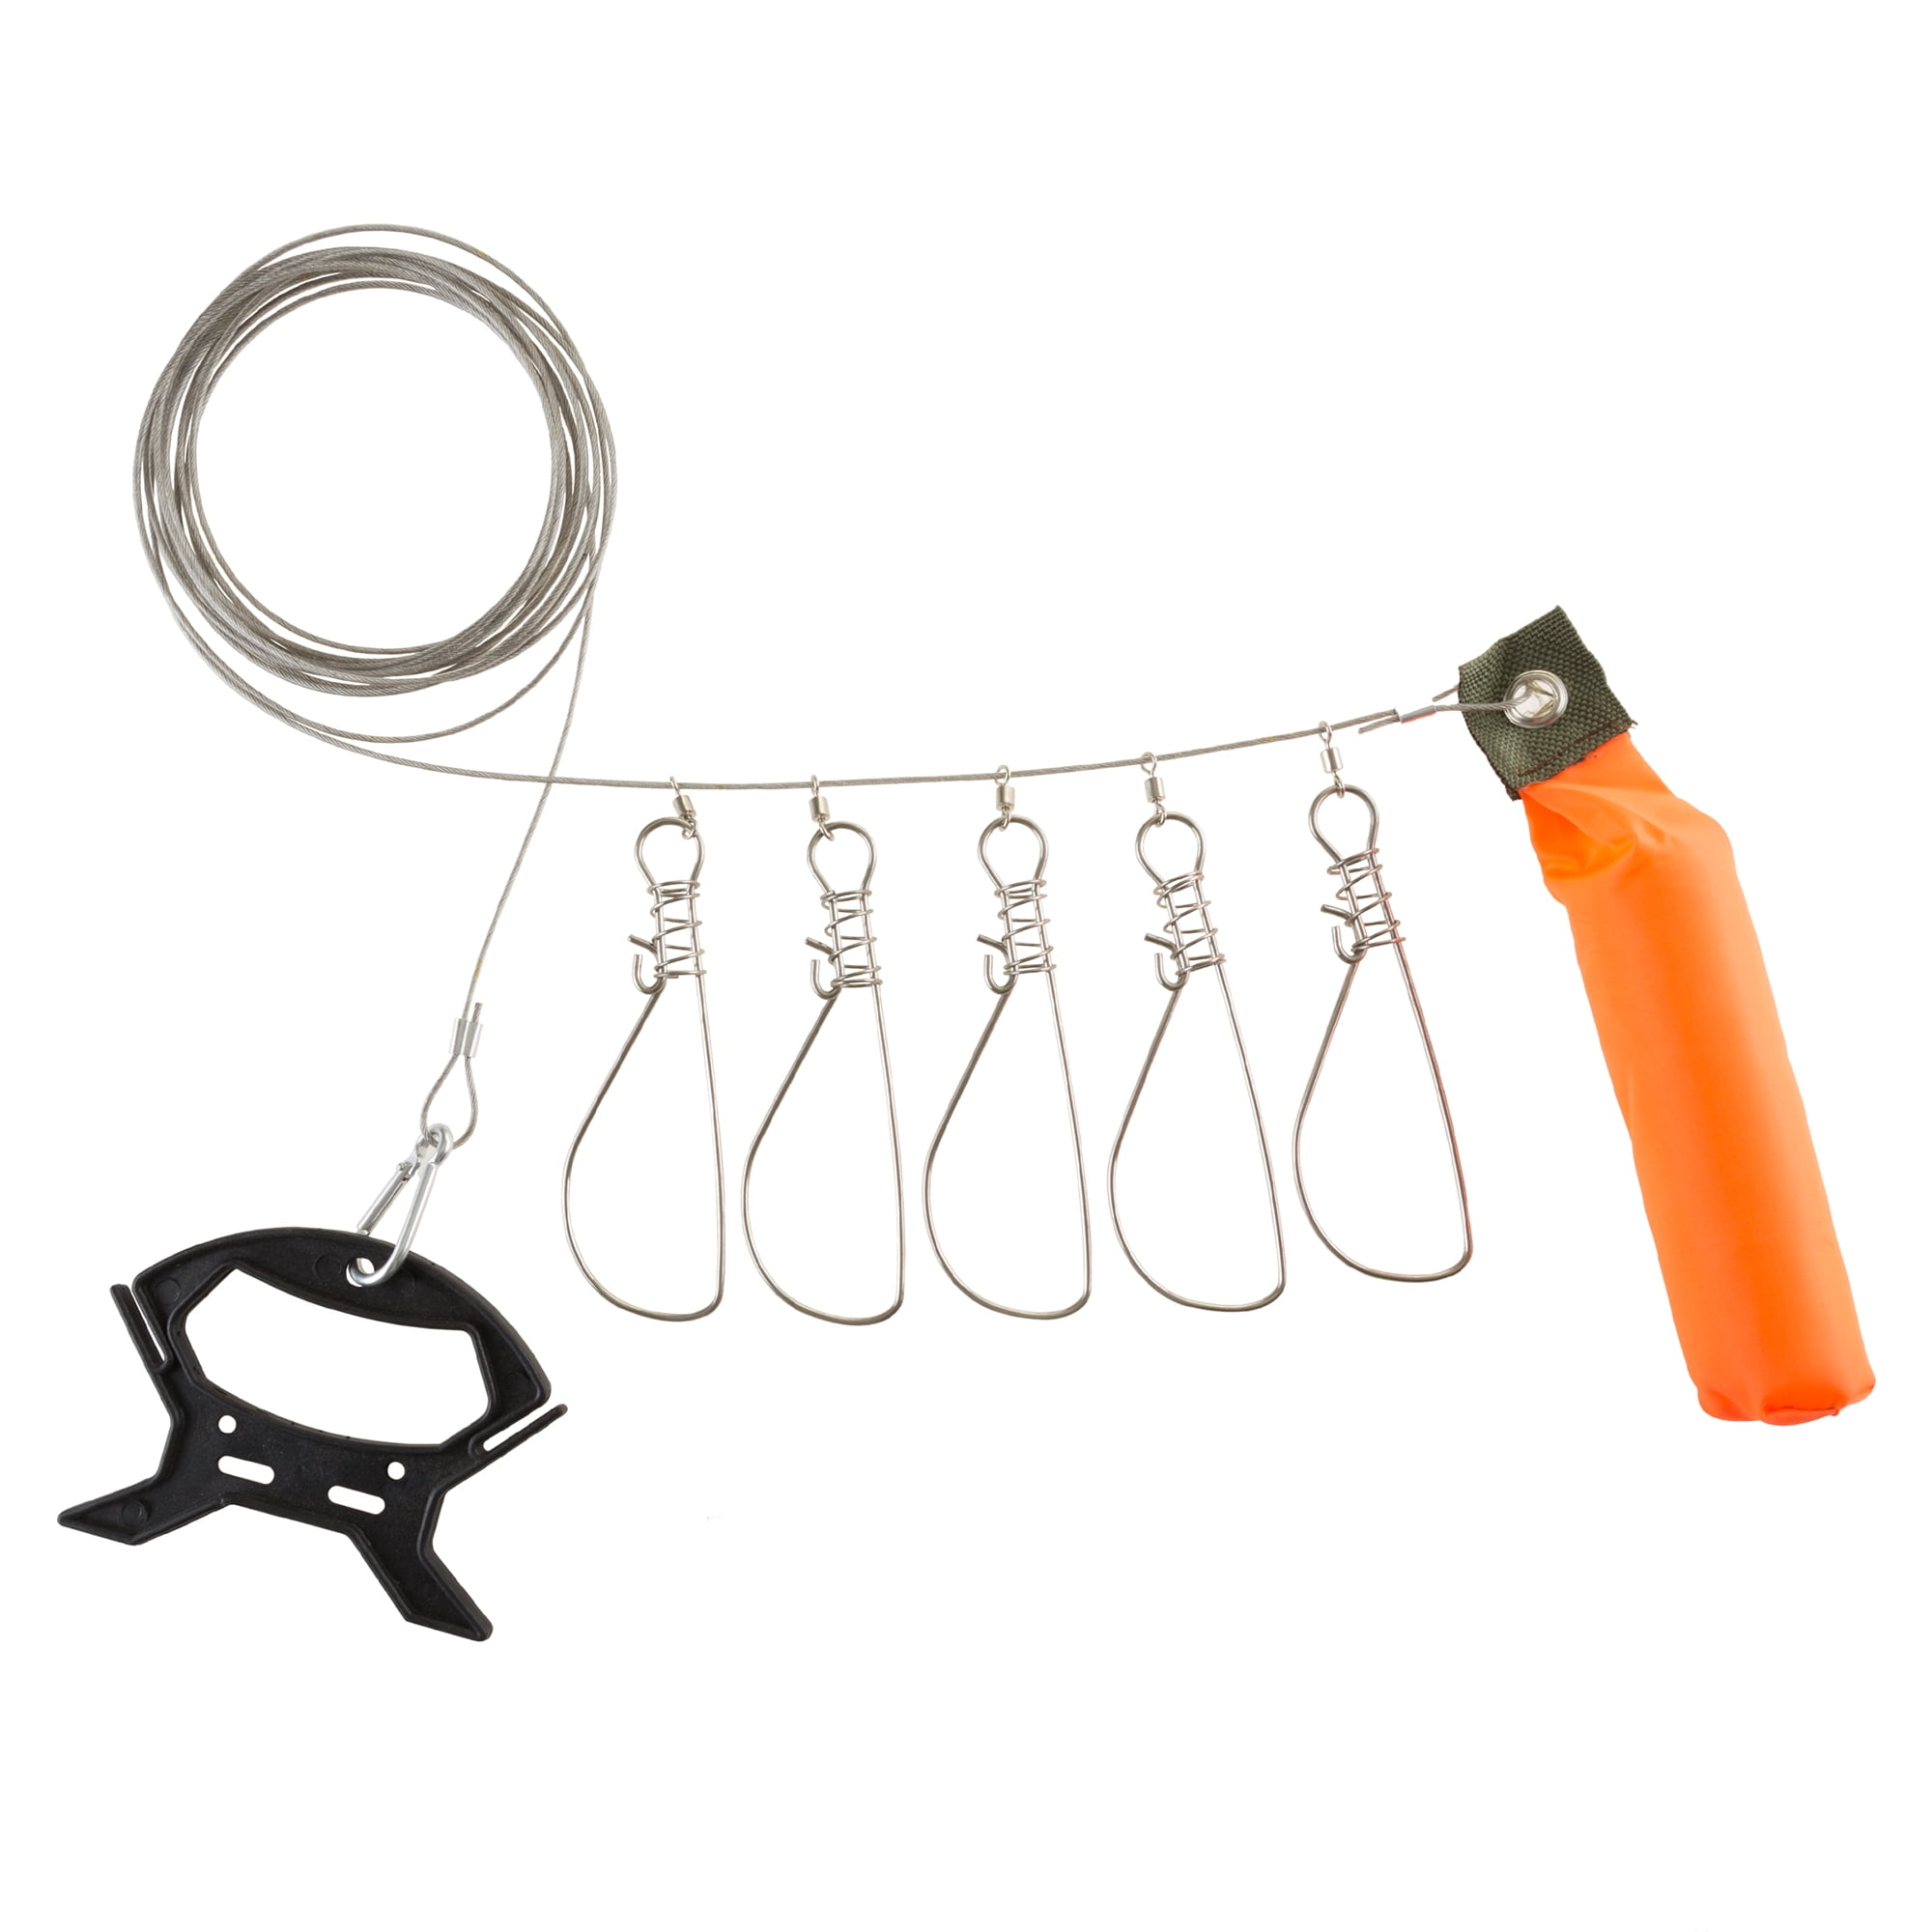 Fish Stringer- Heavy Duty Rope Stringer for Fishing with 5 Stainless Steel,  Tangle Free Hooks, Float and Plastic Handle By Wakeman Outdoors (16'4”) 